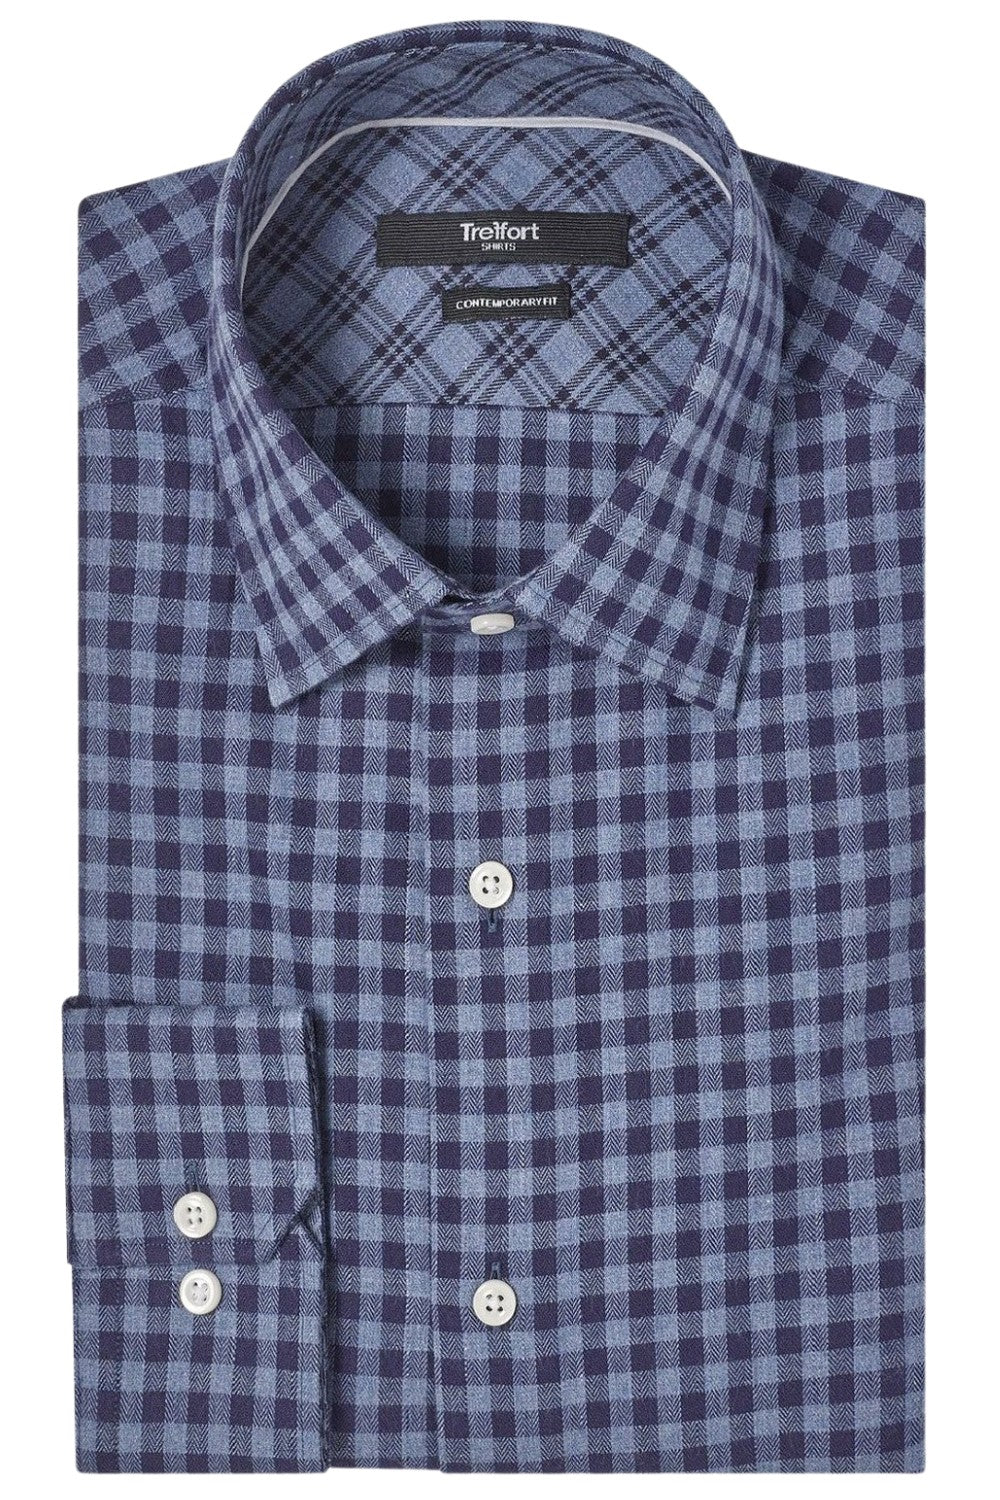 WILLIAMS BLUE CHECKERED BUTTON DOWN DRESS SHIRT - CASUAL /FORMAL EVENT - FRONT VIEW